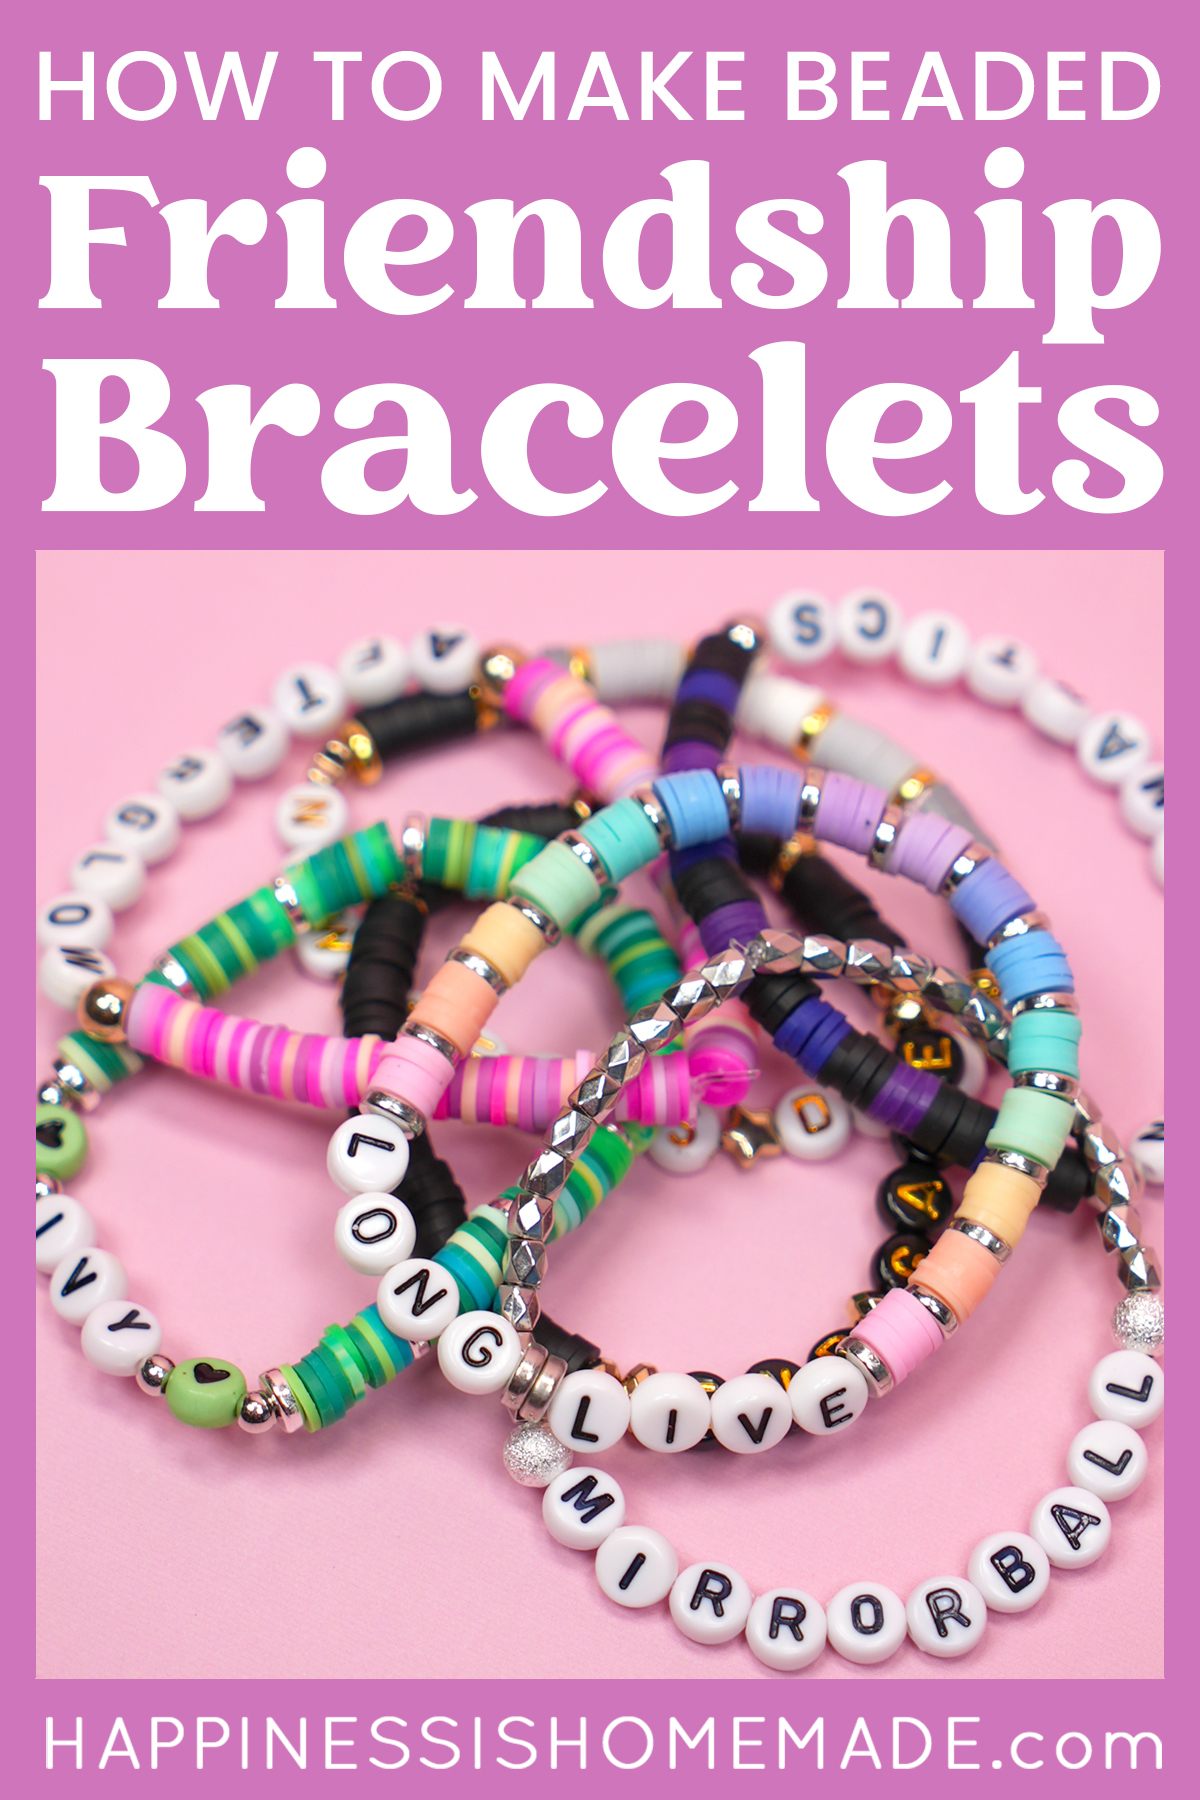 "How to Make Beaded Friendship Bracelets" graphic with text on pink background with Taylor Swift bracelets